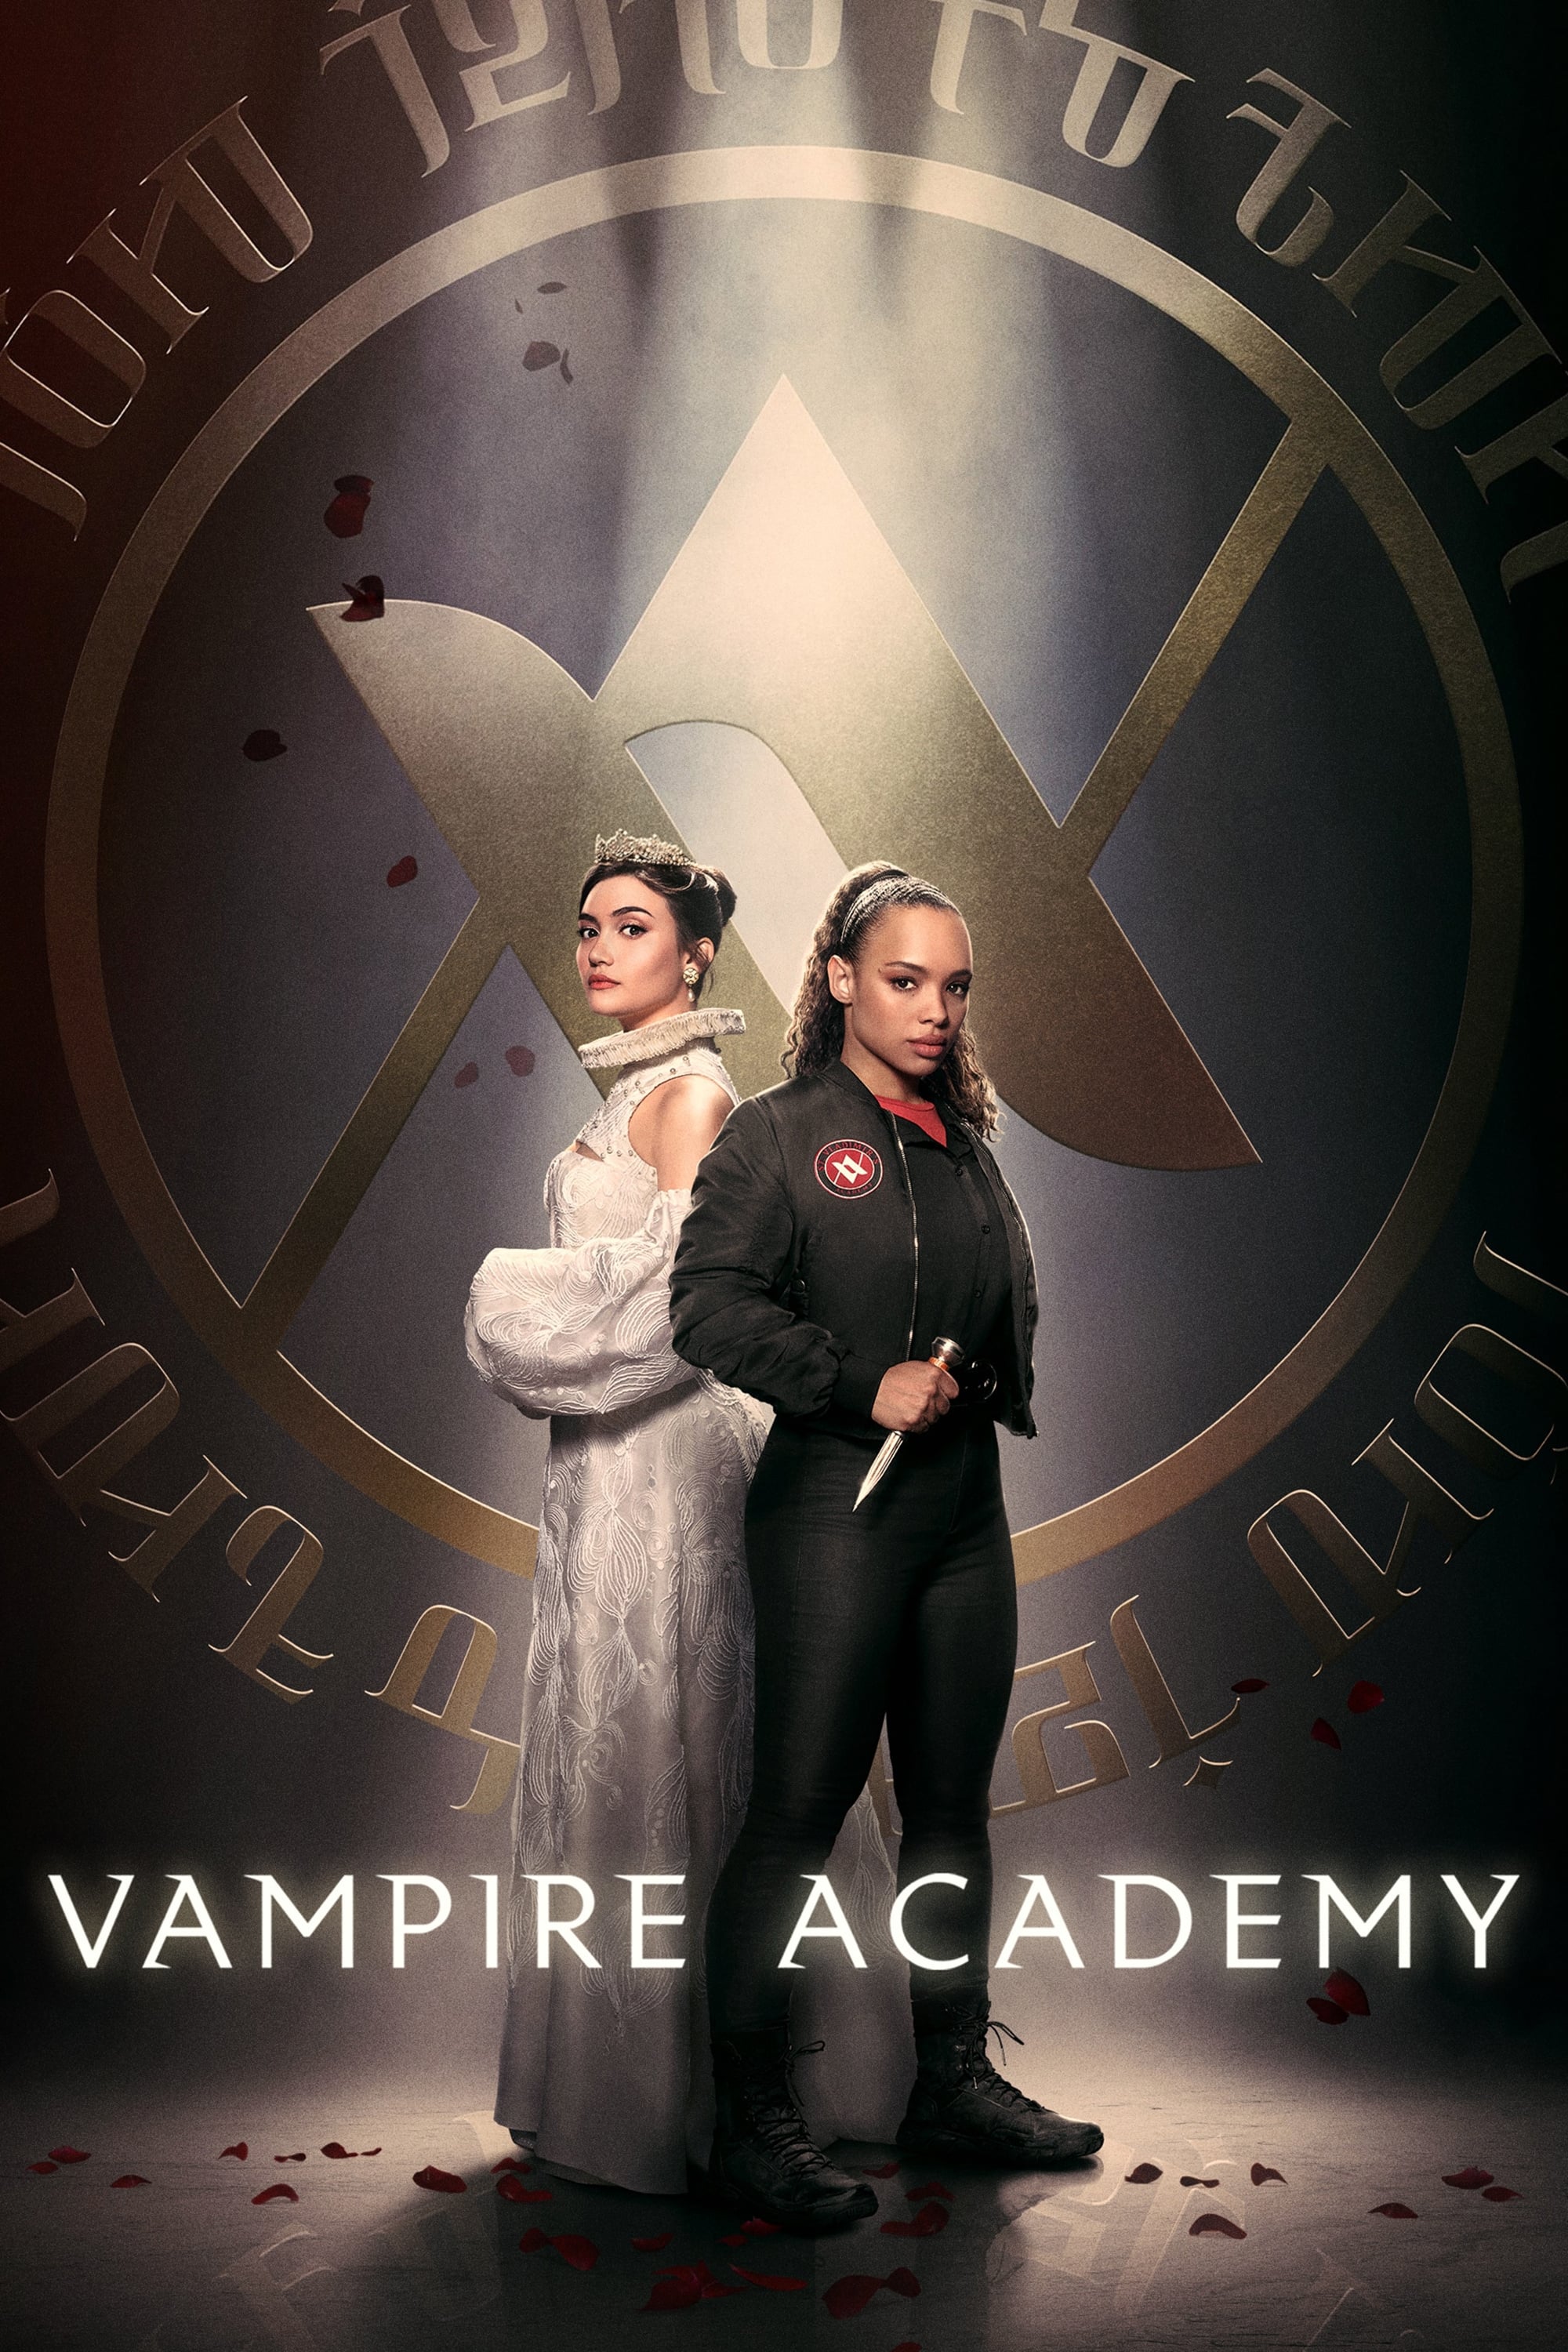 Vampire Academy TV Shows About Relationship